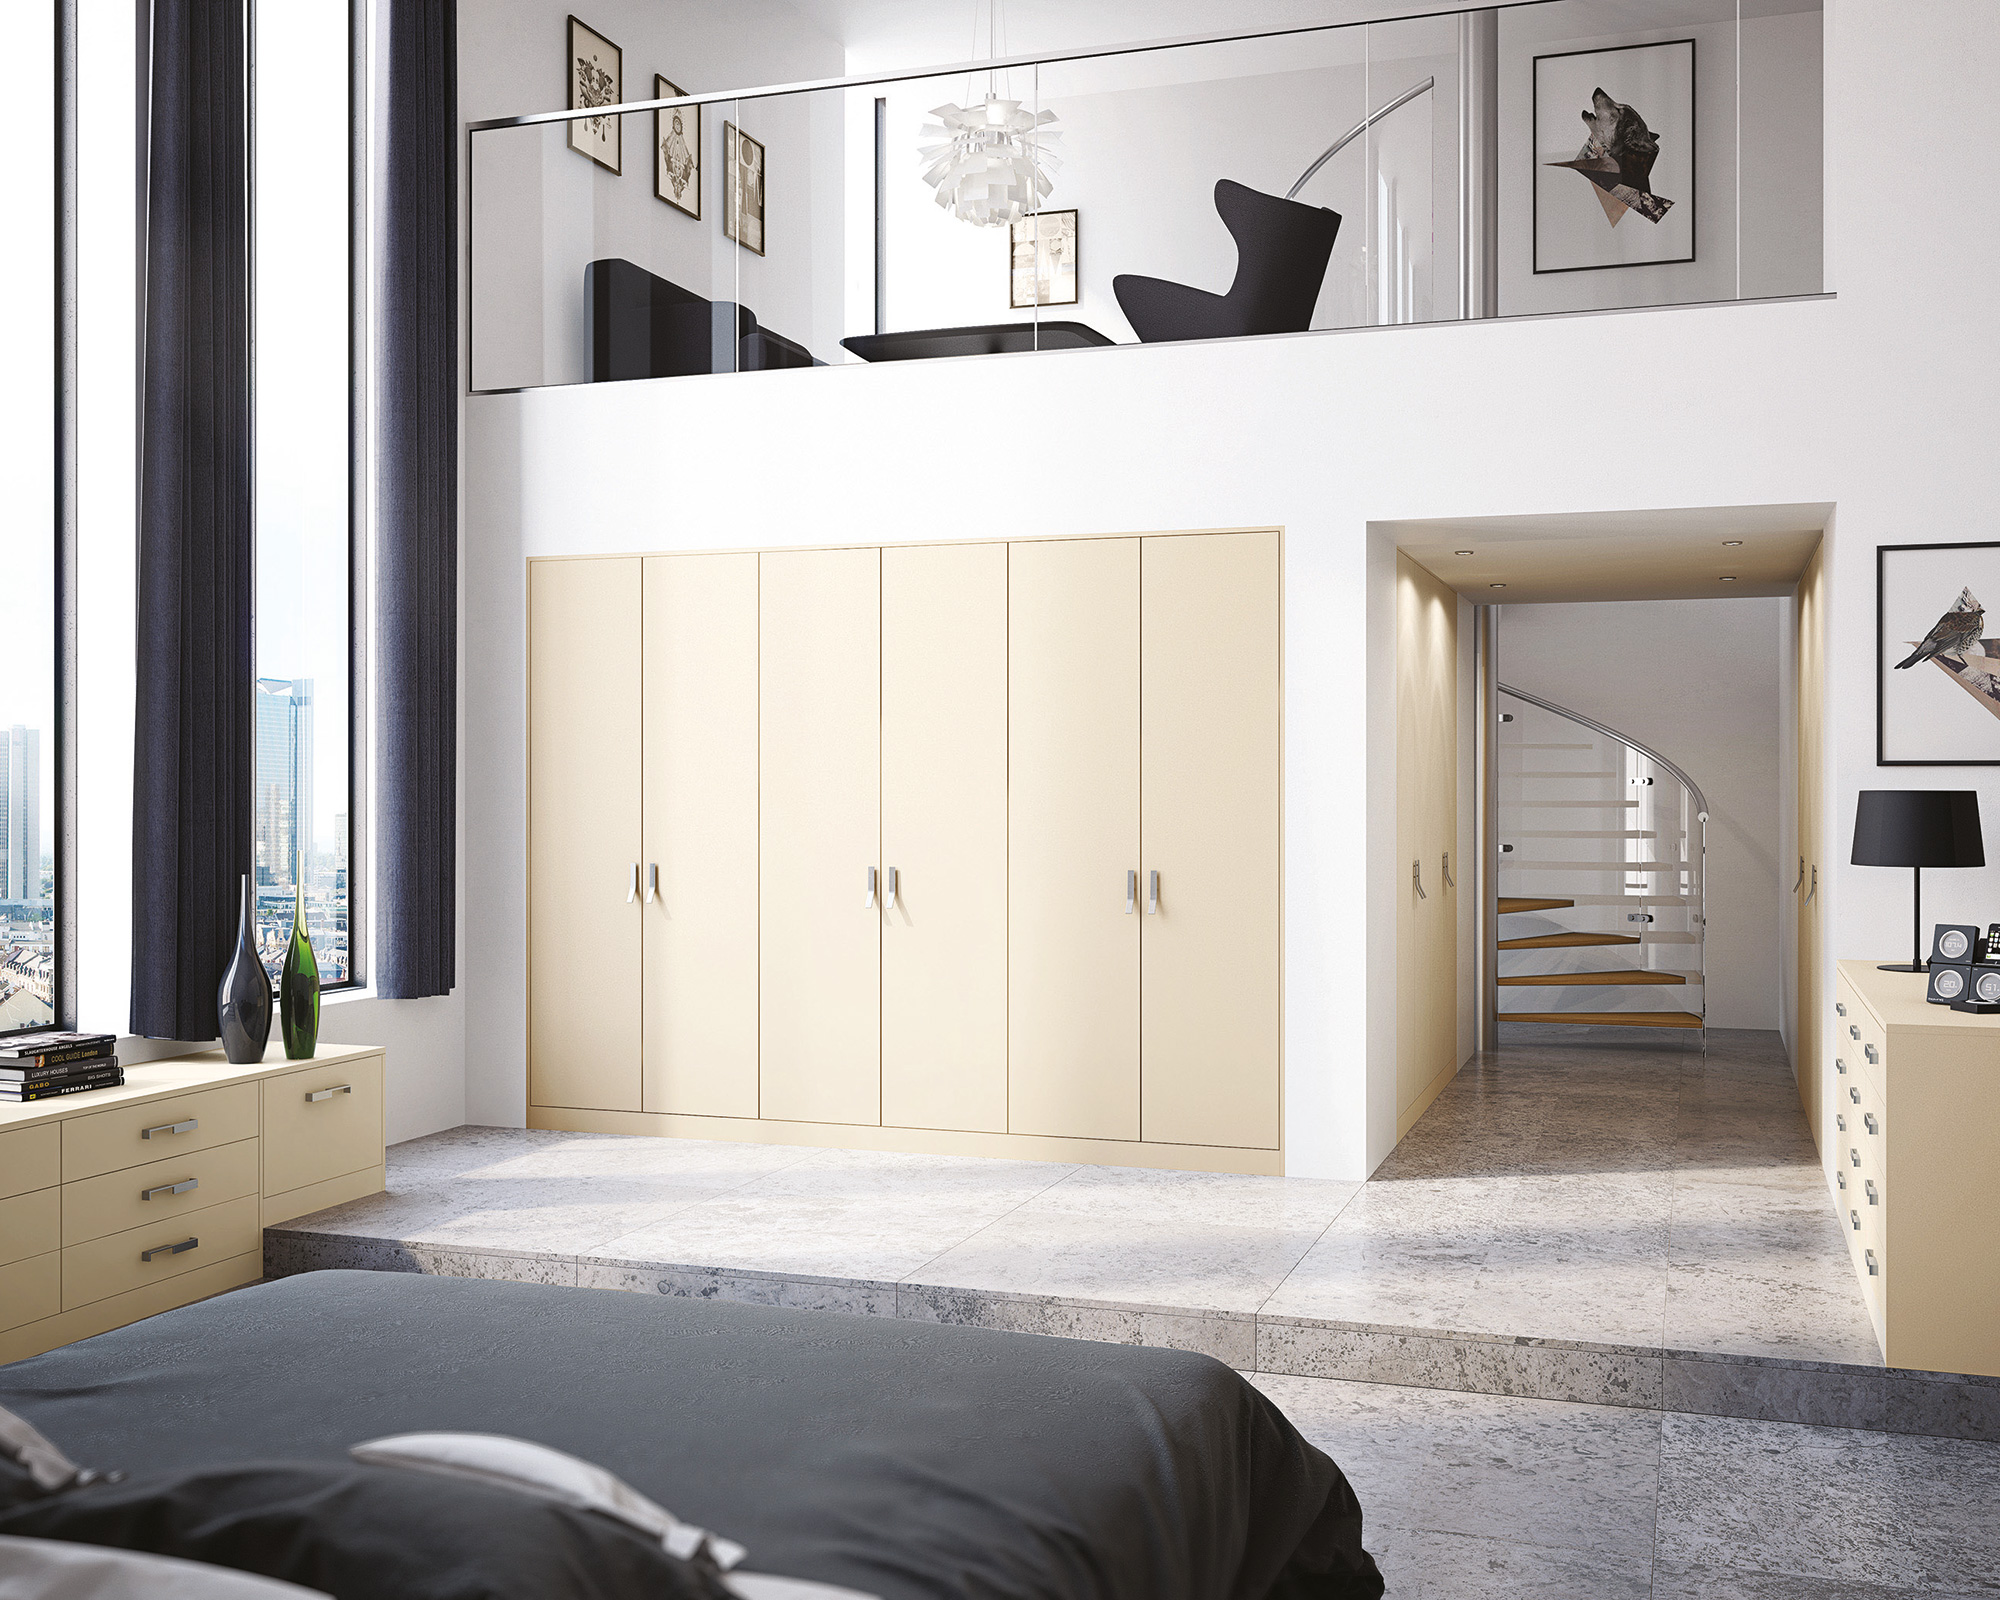 Beige space-saving storage units in a minimalist and muted bedroom